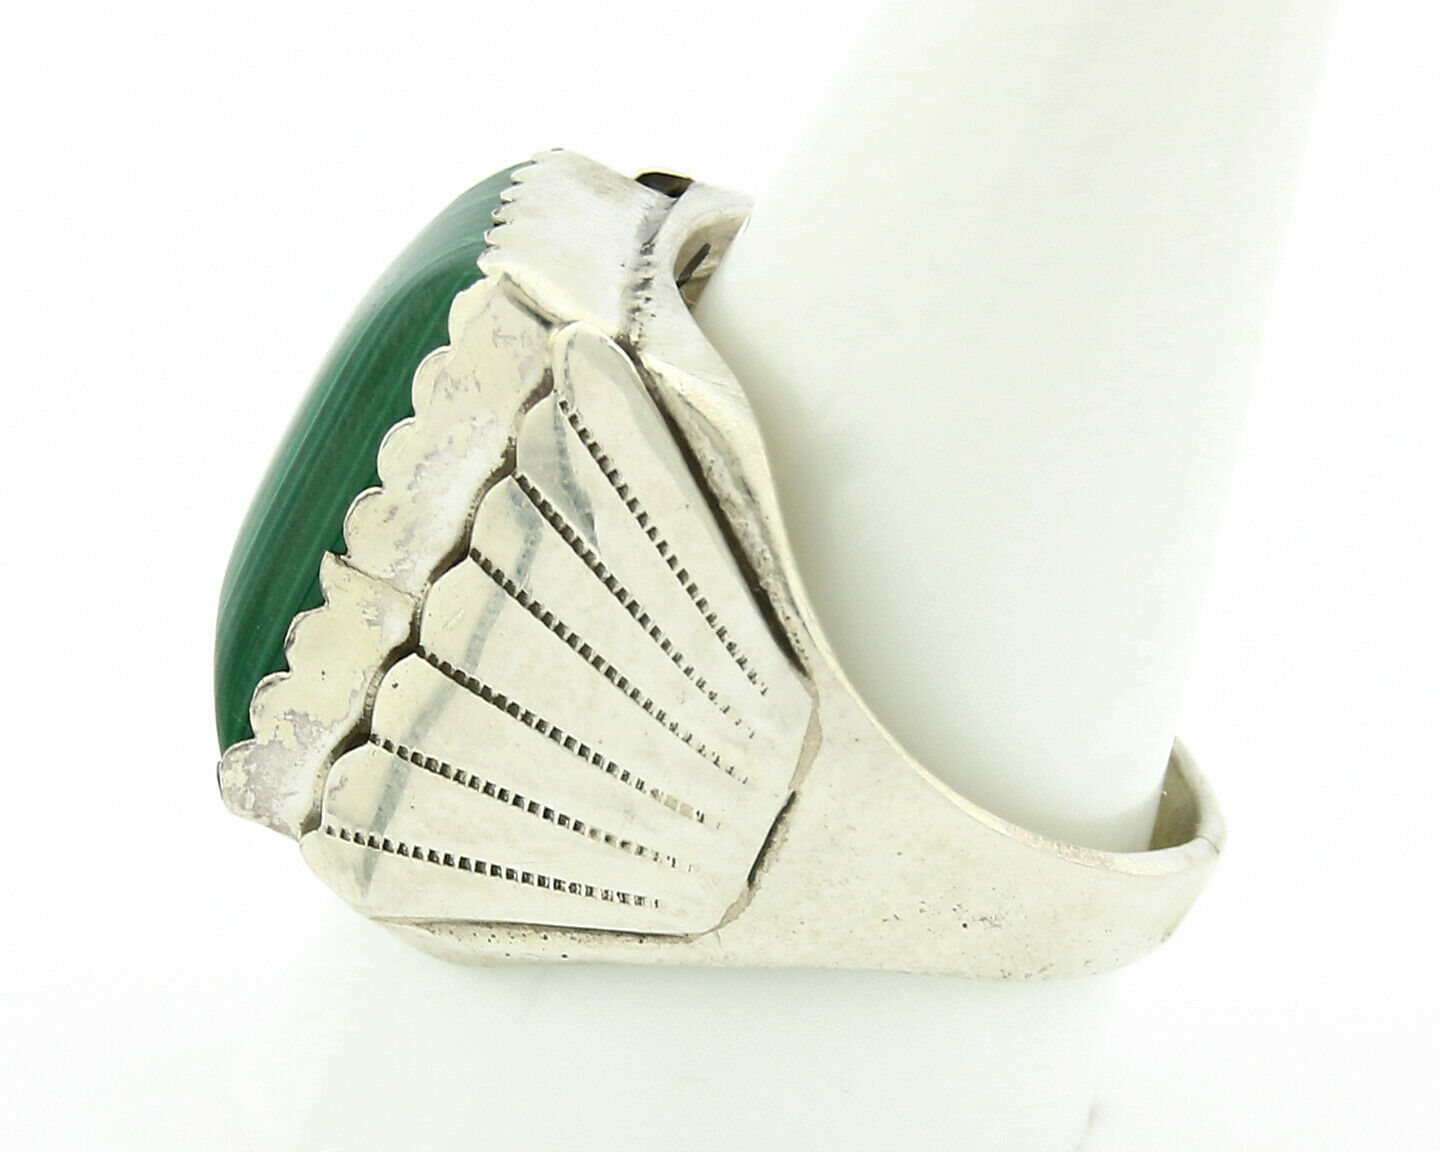 Navajo Ring .925 Silver Natural Malachite Signed Artist DL Native American C.80s